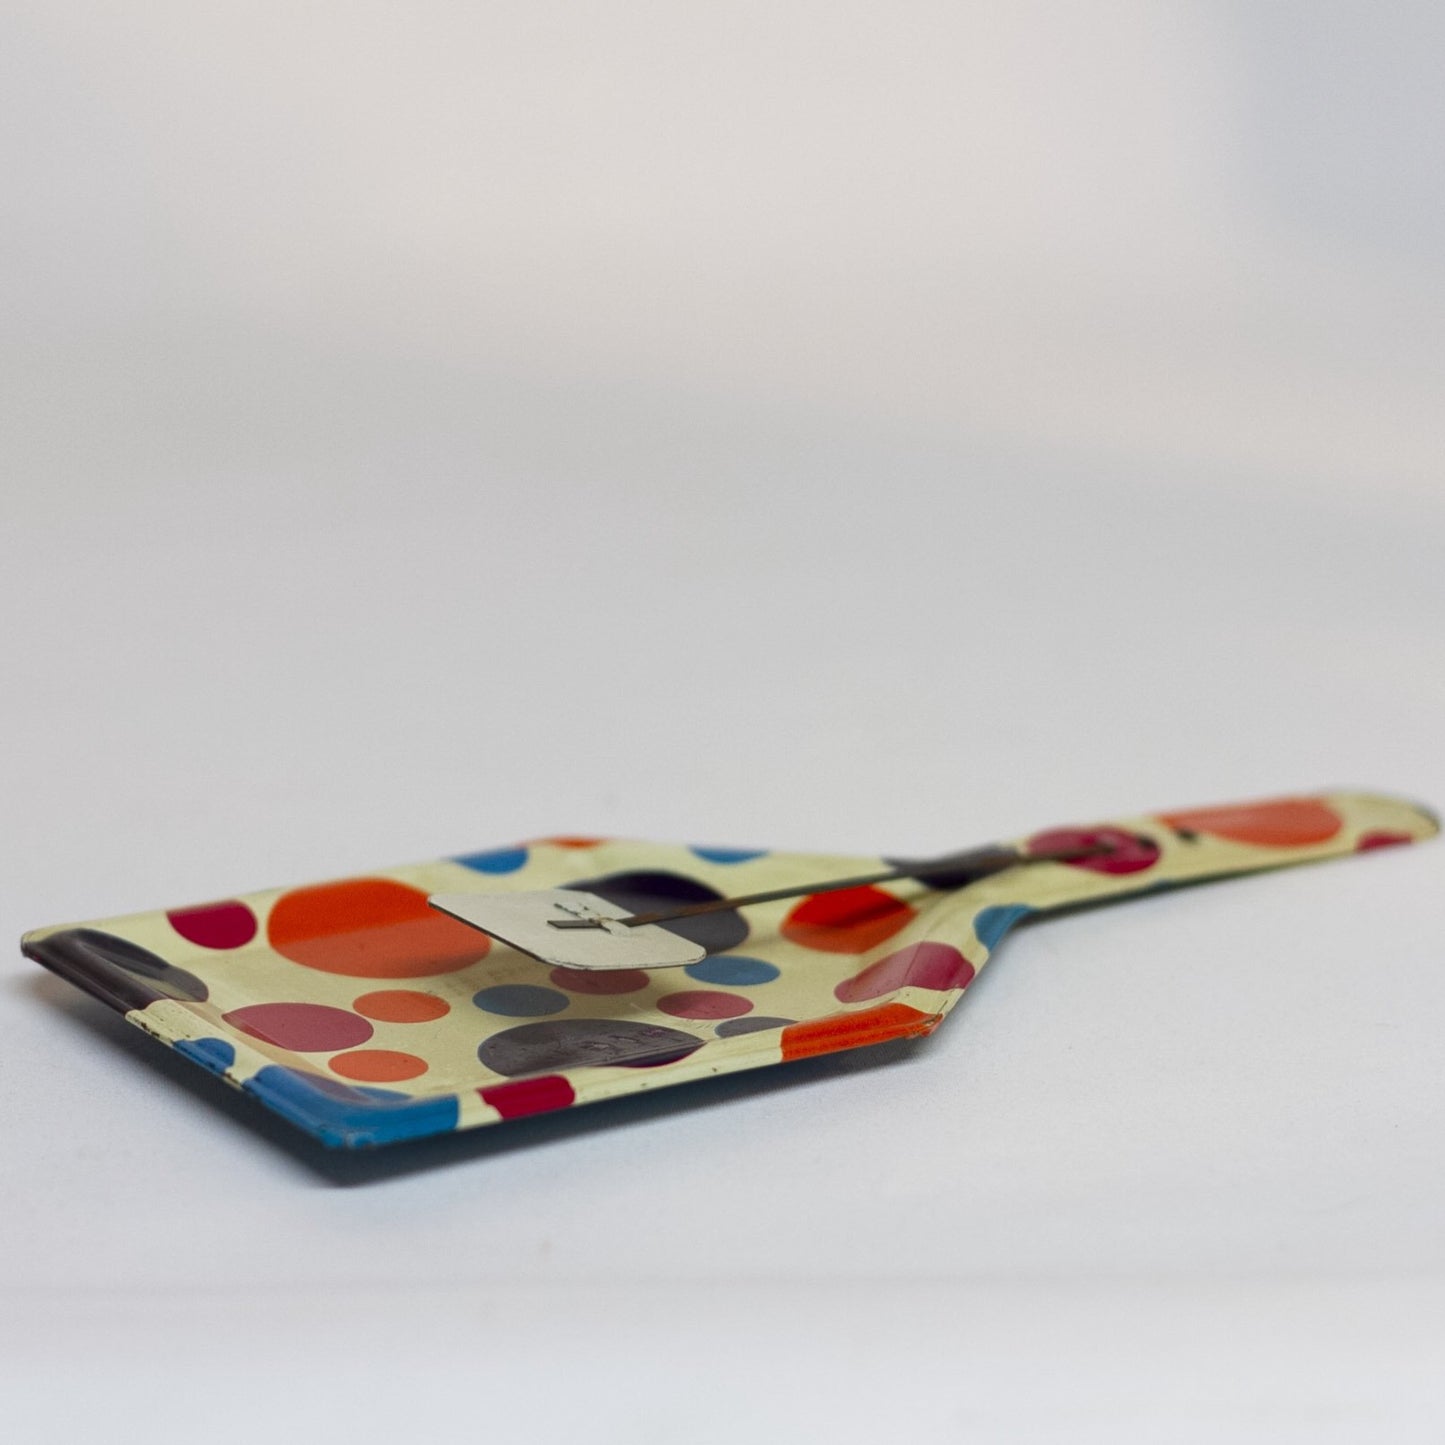 TIN-LITHOGRAPH POLKA DOT CLACKER 1950s NOISEMAKER. The lithograph on the shovel shaped noisemaker is filled with red, orange, purple, and blue polka dots. Appears to be a style that was part of a Party Time set made by the U.S. Metal Toy Manufacturing Company of Brooklyn, New York, but the lithograph is not marked. 